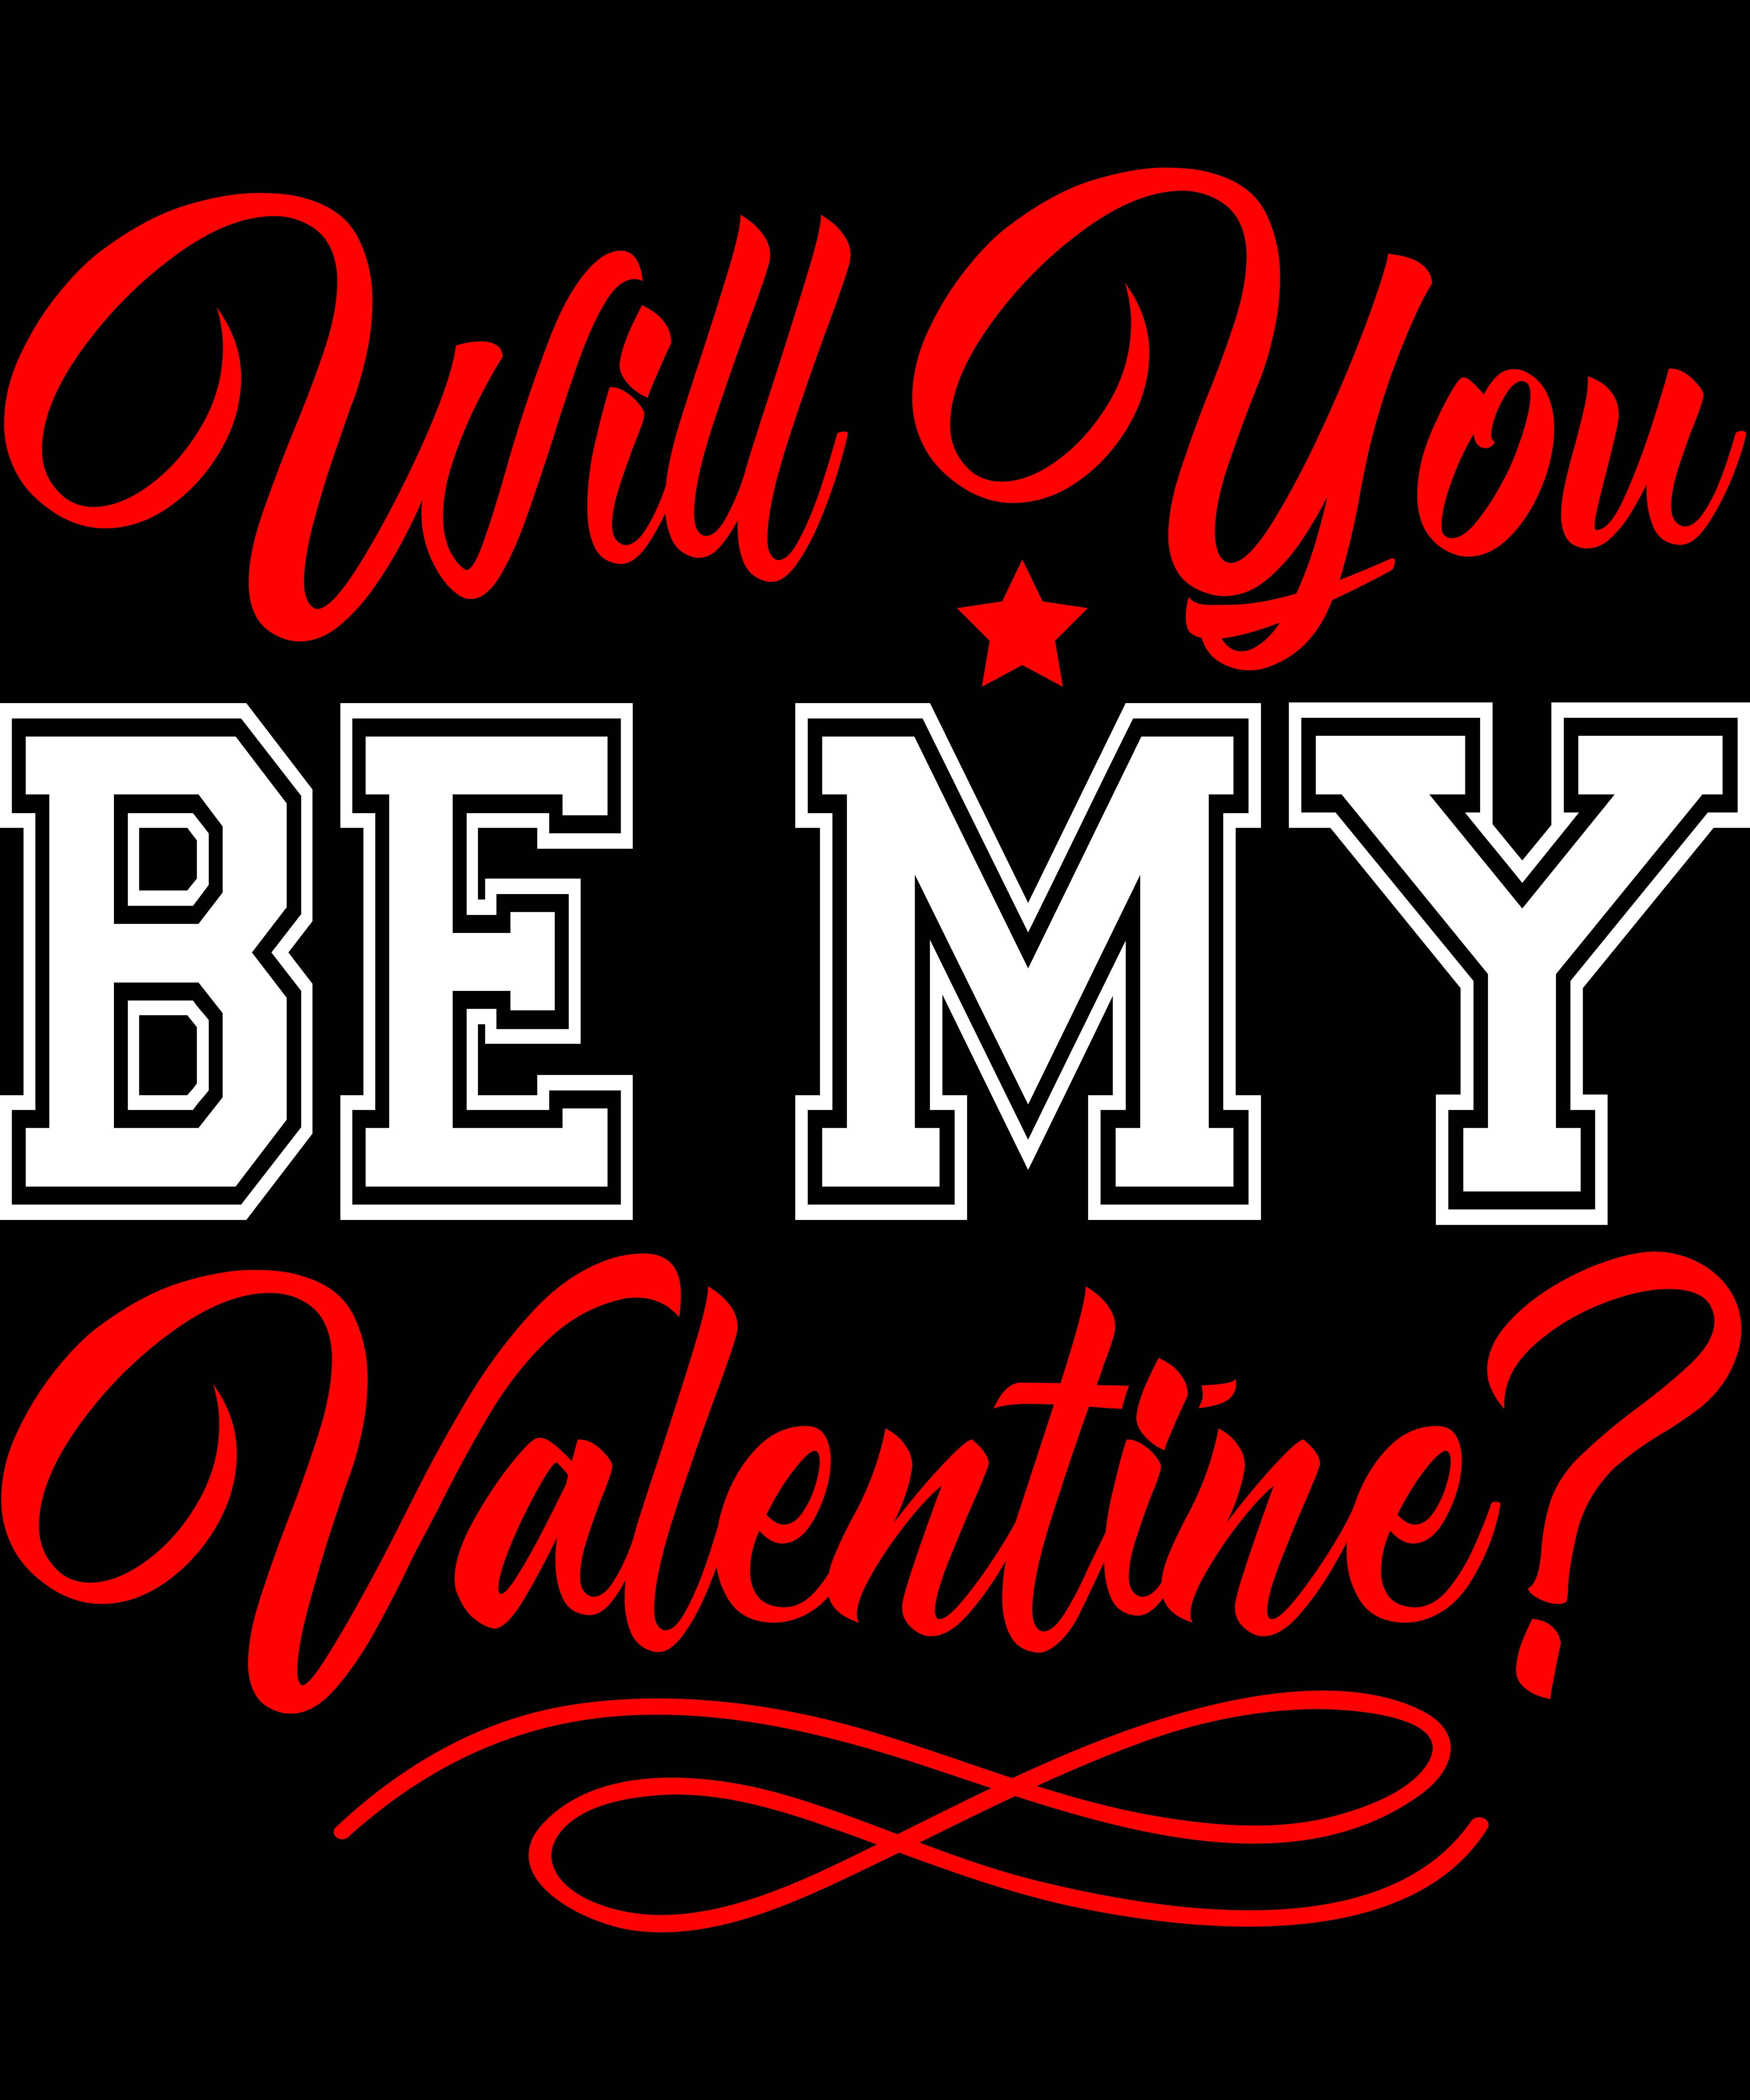 Will you be my valentine - quote for t-shirt design.